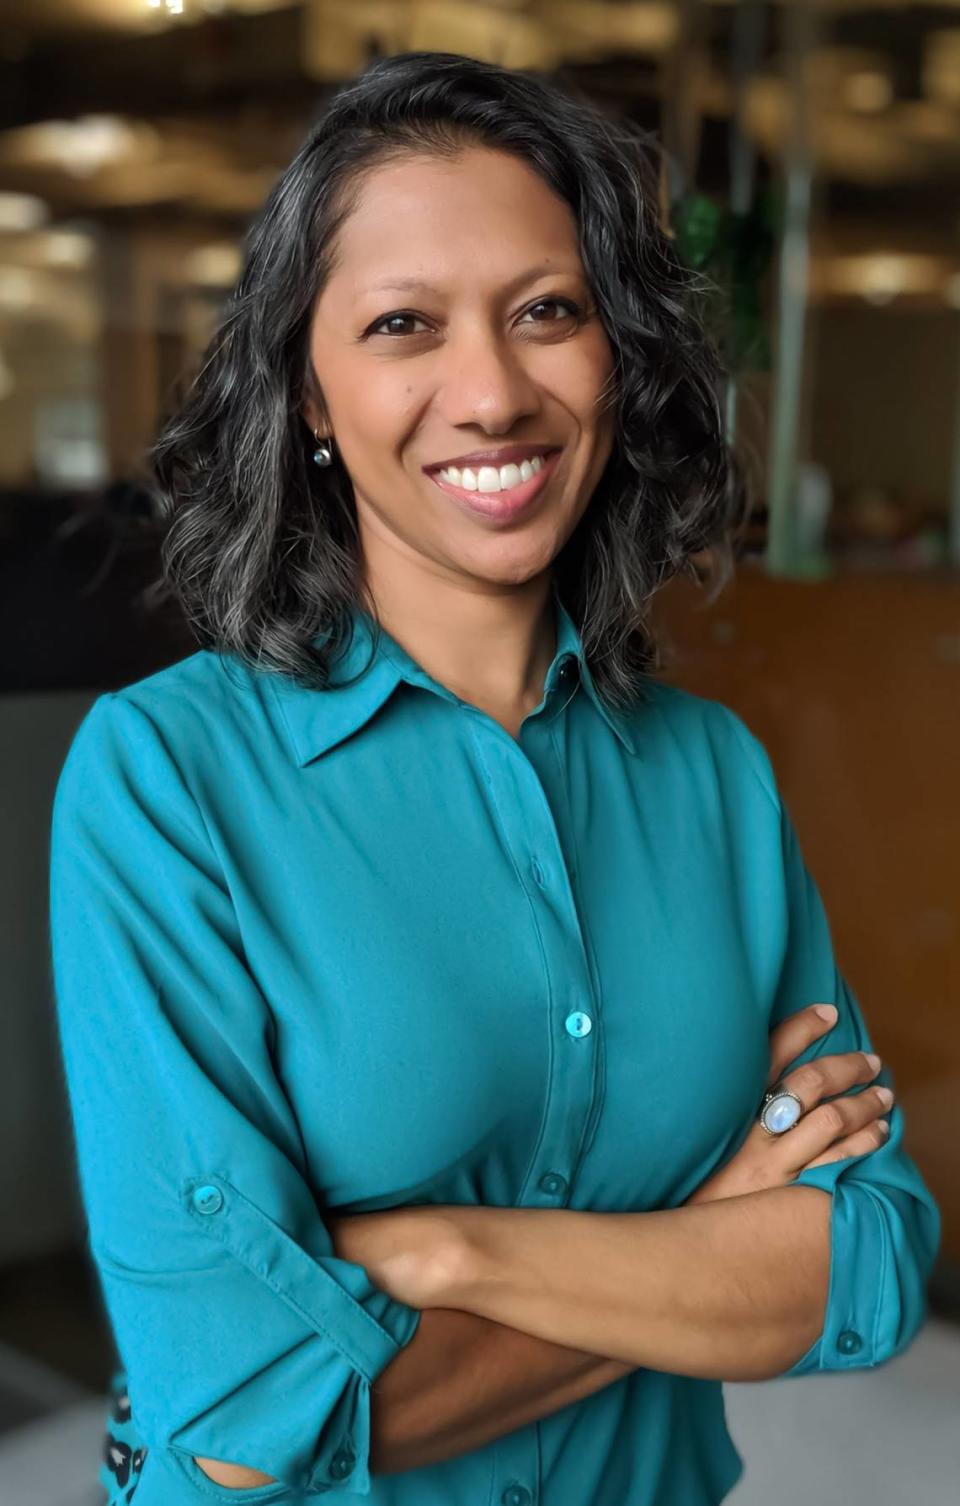 The City of Charlotte named Priya Sircar, former director of arts for the John S. and James L. Knight Foundation in Miami, as its first arts and culture officer on August 27, 2021.